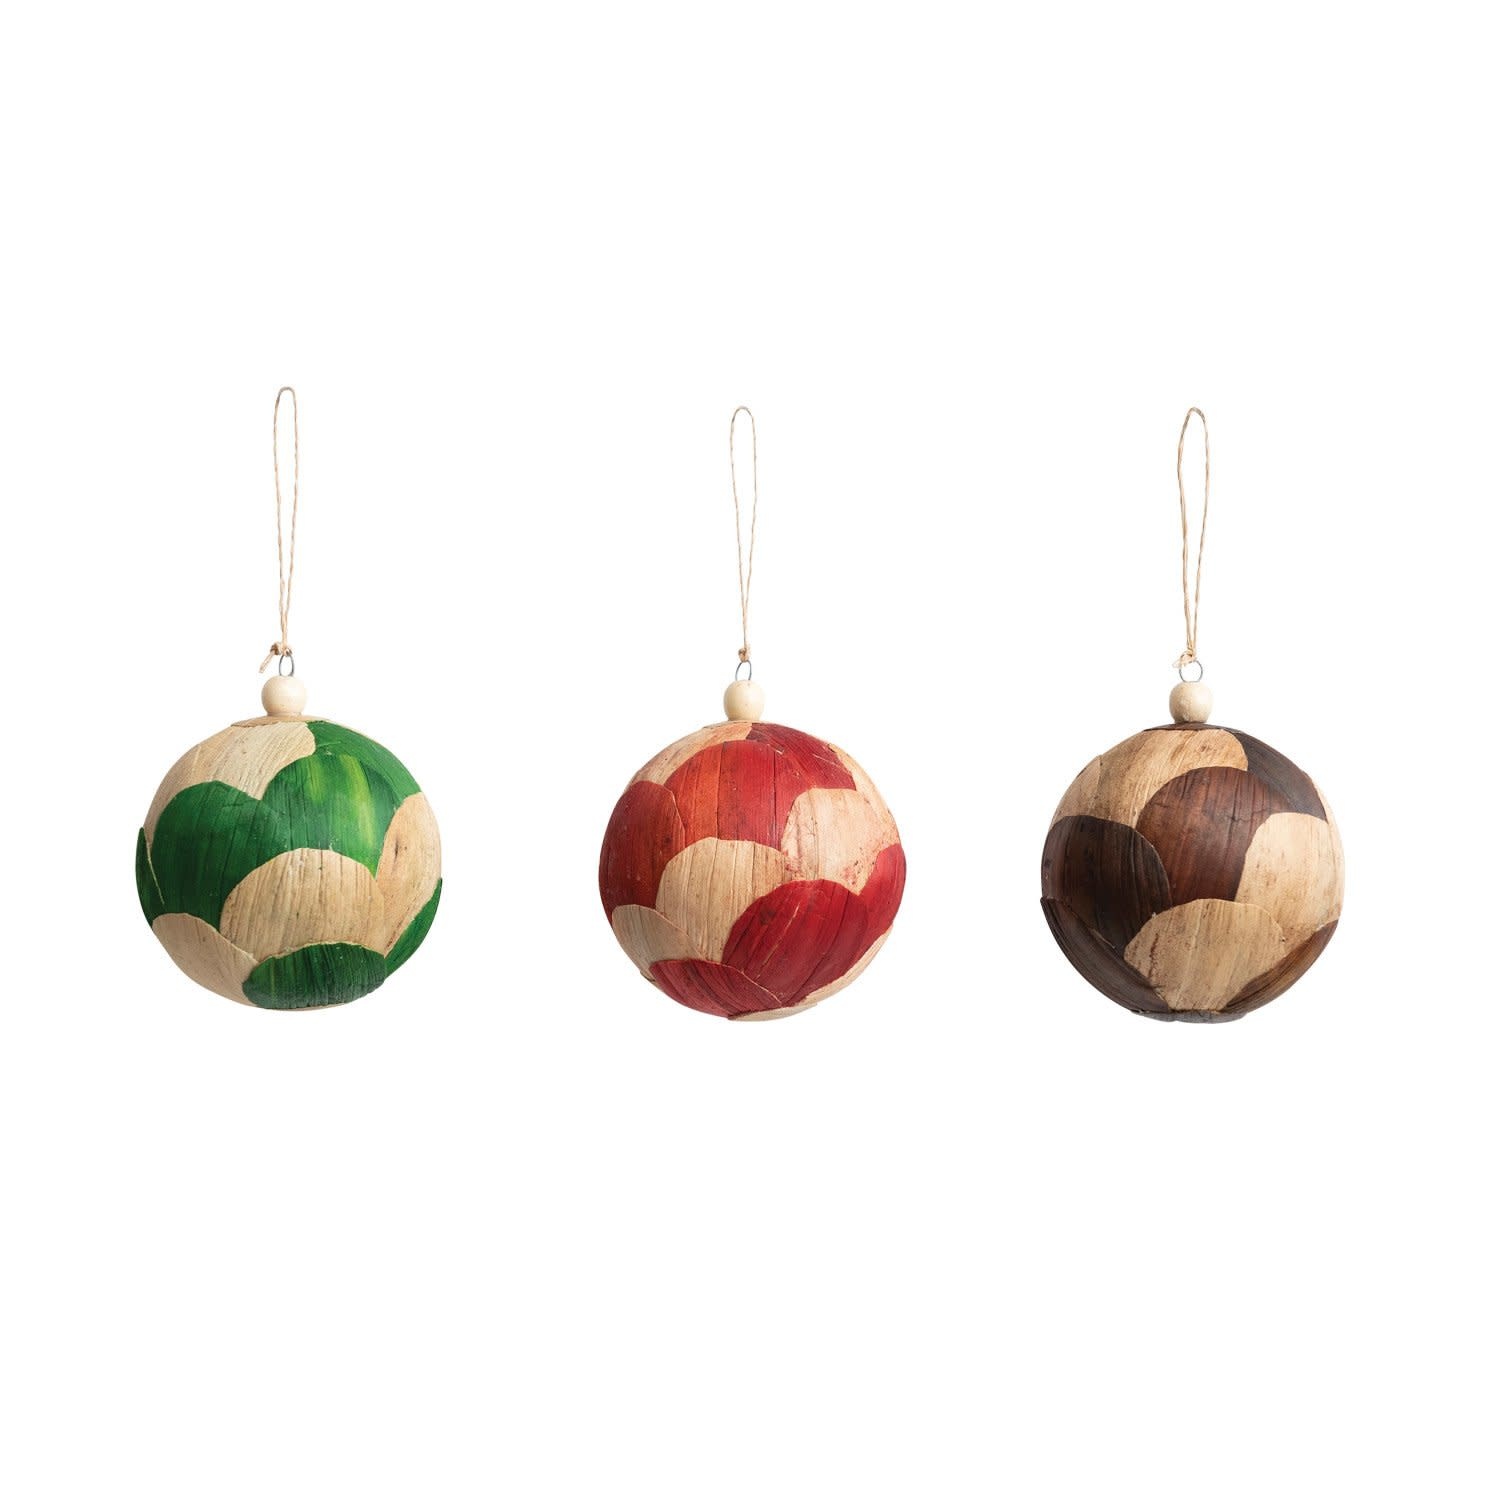 Round Lily Leaf Ball Ornament w/ Wood Bead, Brown